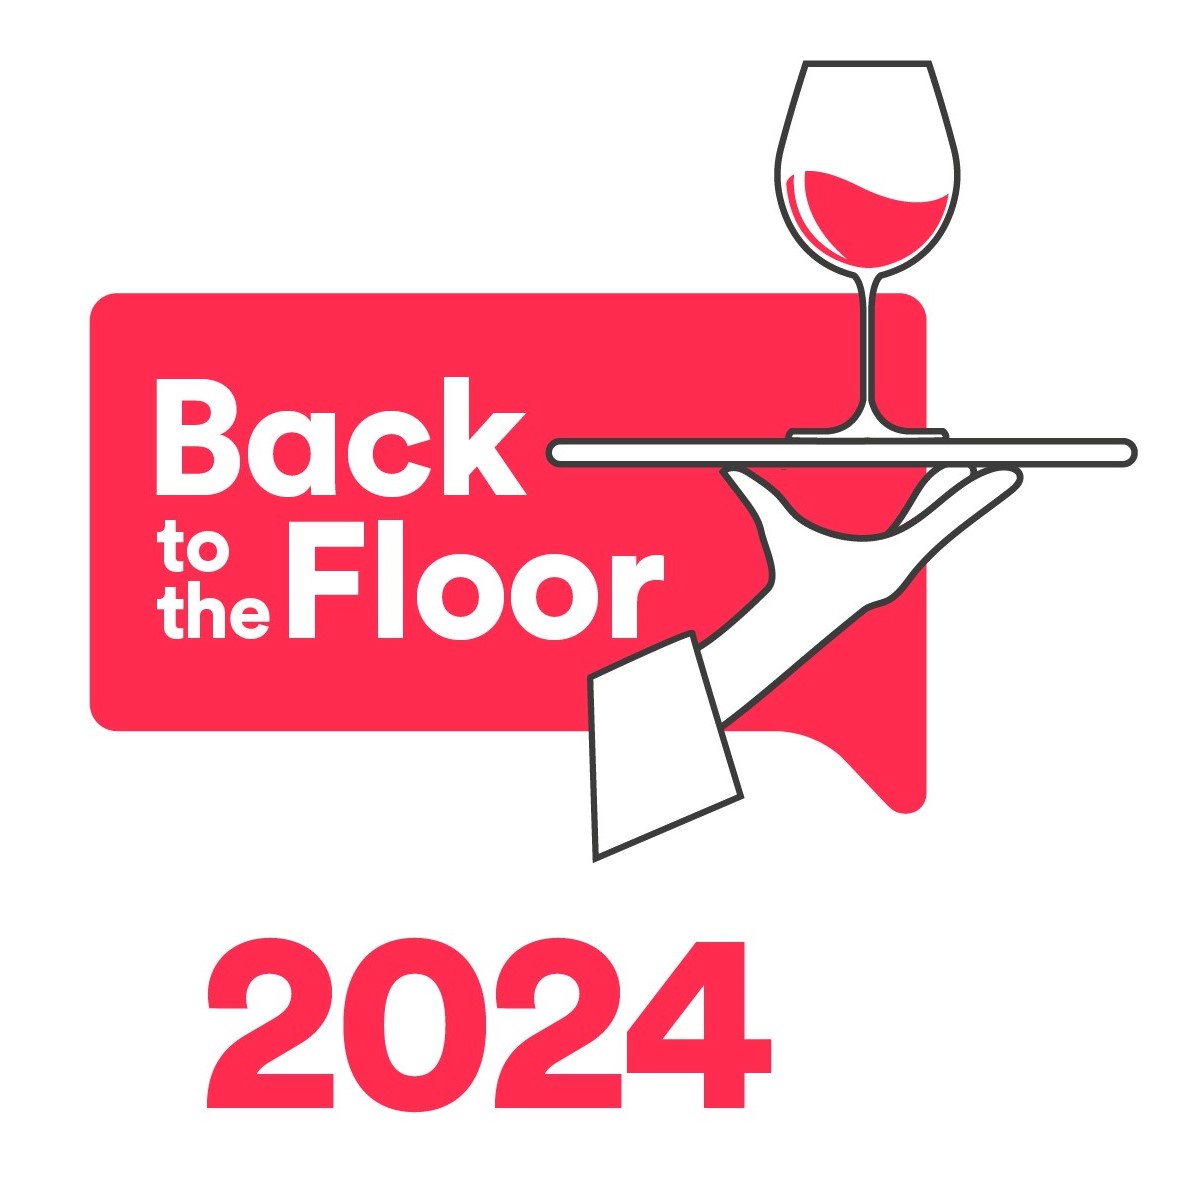 Today's the day! Will we see you at Back to the Floor tonight? Thank you for making it possible @ParkPlazaHotels @catererdotcom @UmbrellaTES @FarncombeEstate @Exclusive_Hotel @AmexUK @hp_hotels #BTTF6 #lethefunbegin